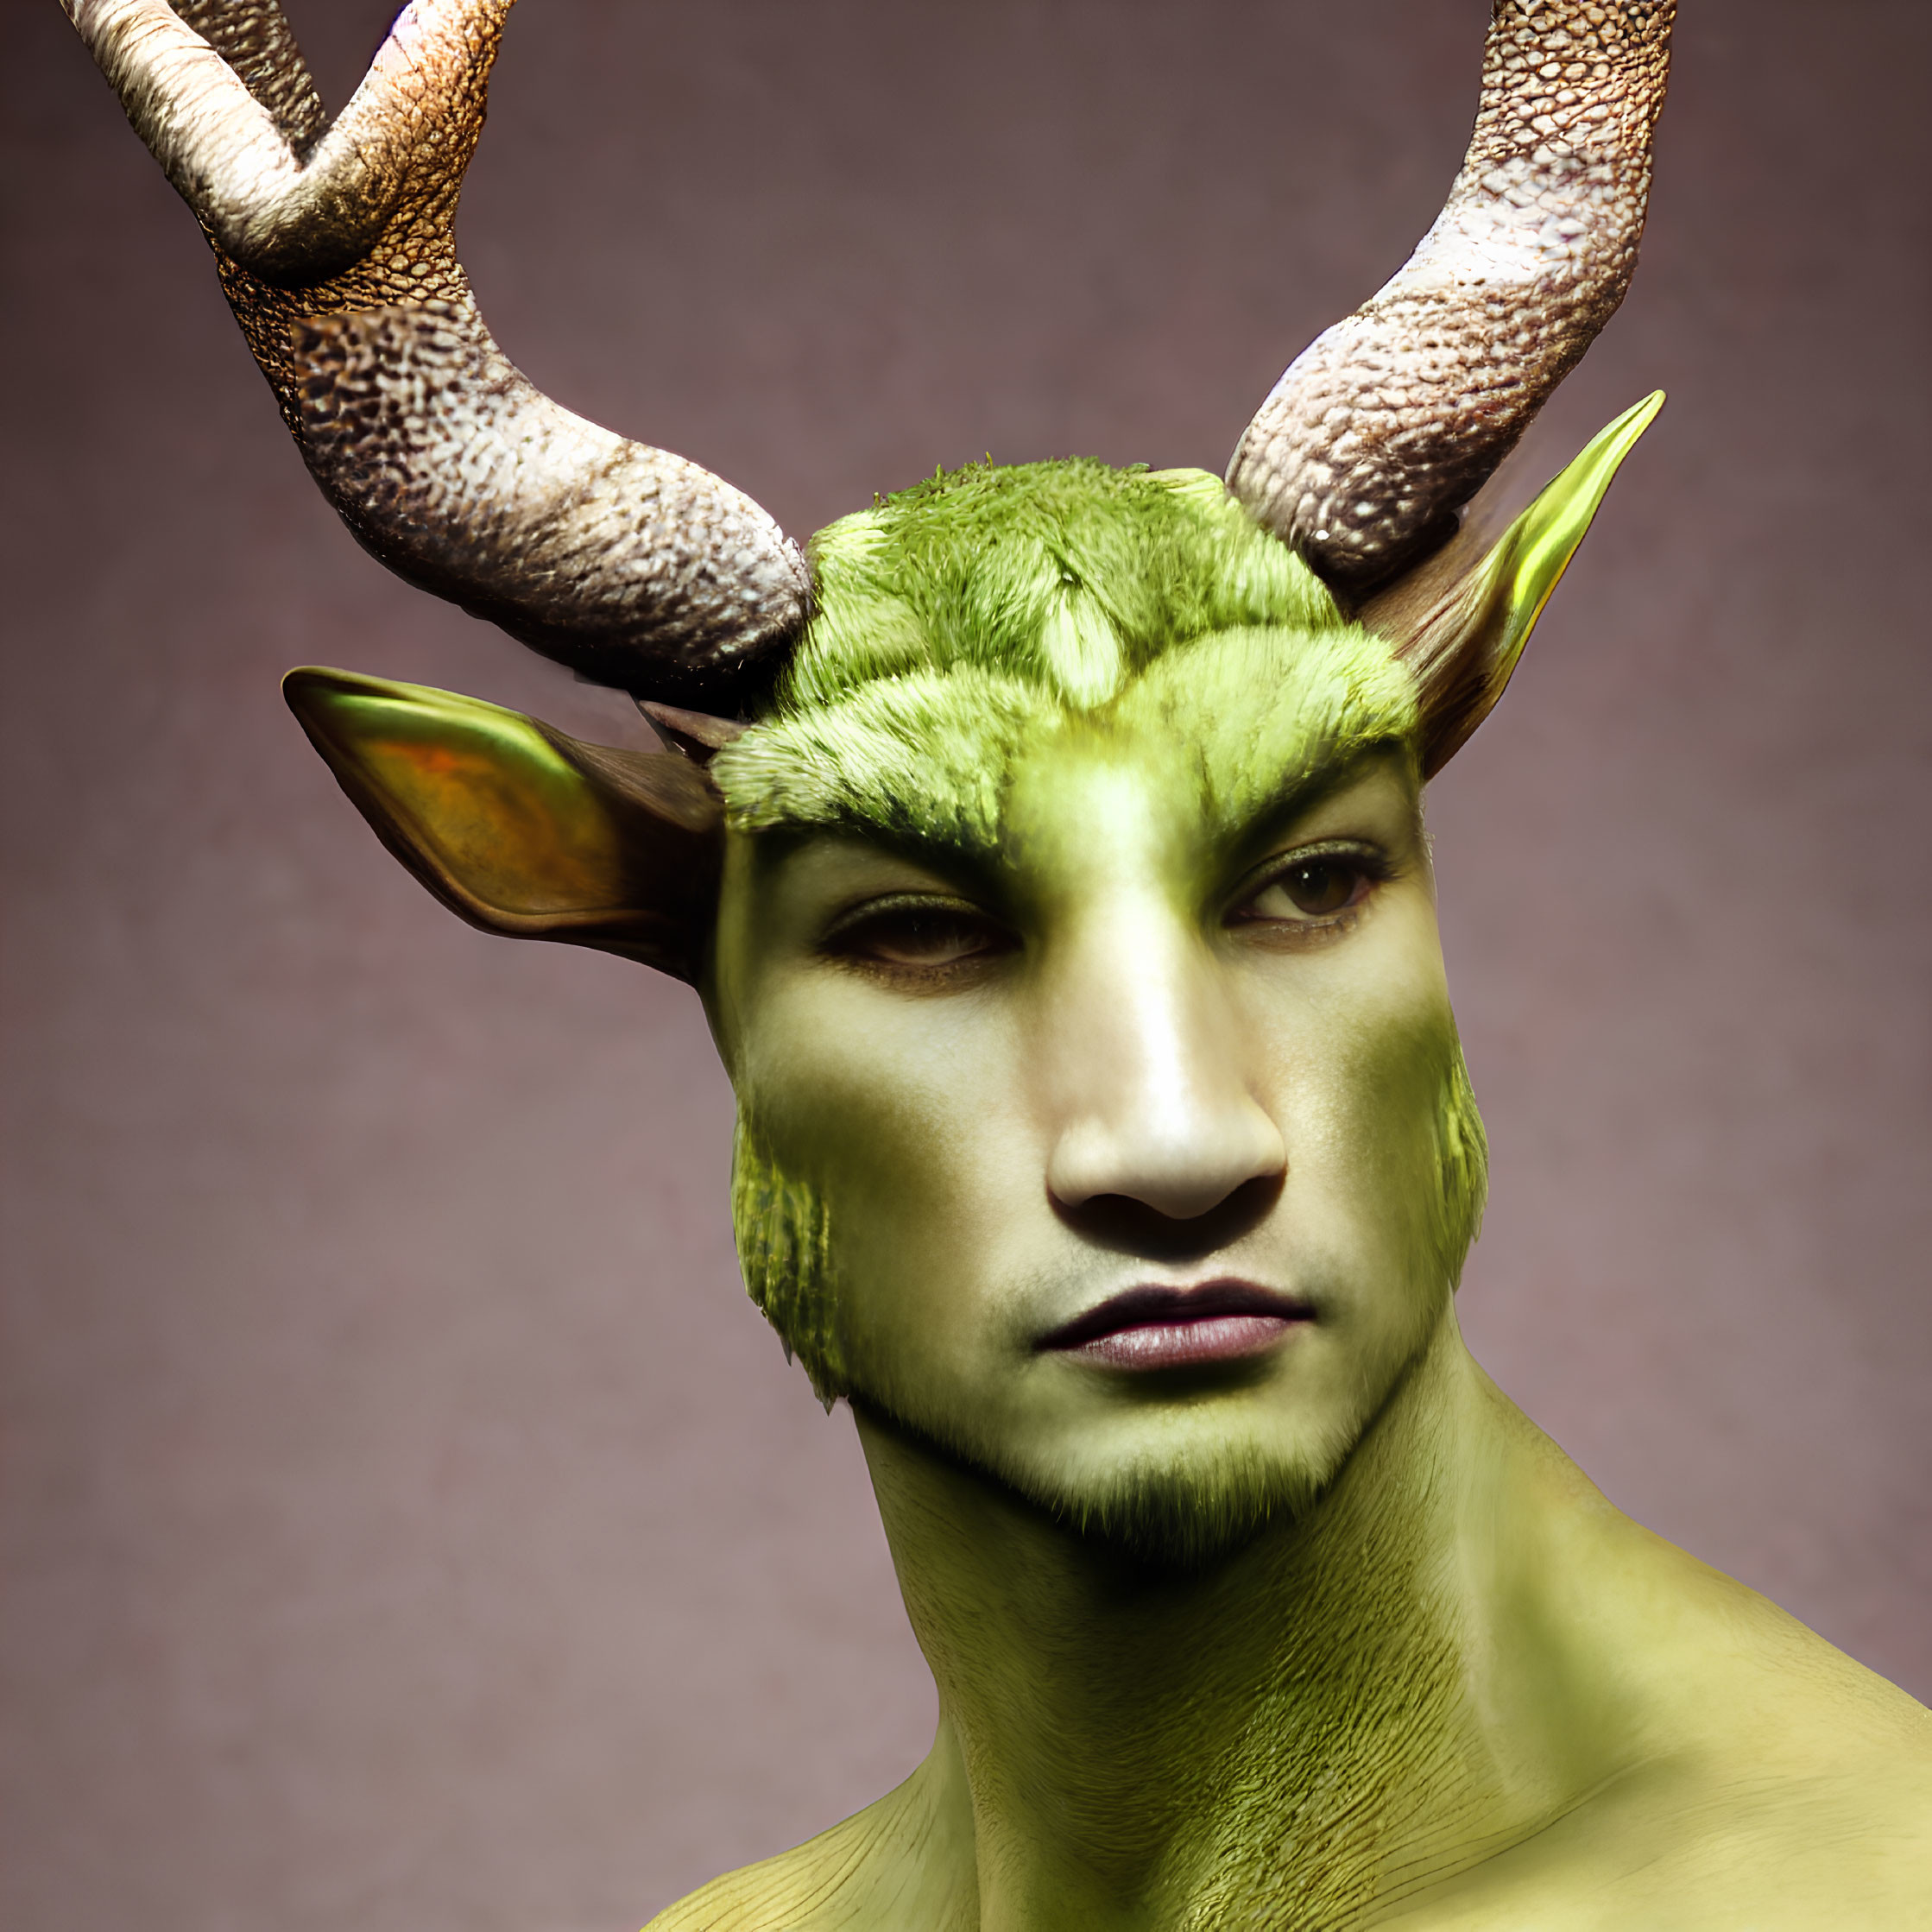 Artistic makeup featuring antlers, green skin, and pointed ears on pink background